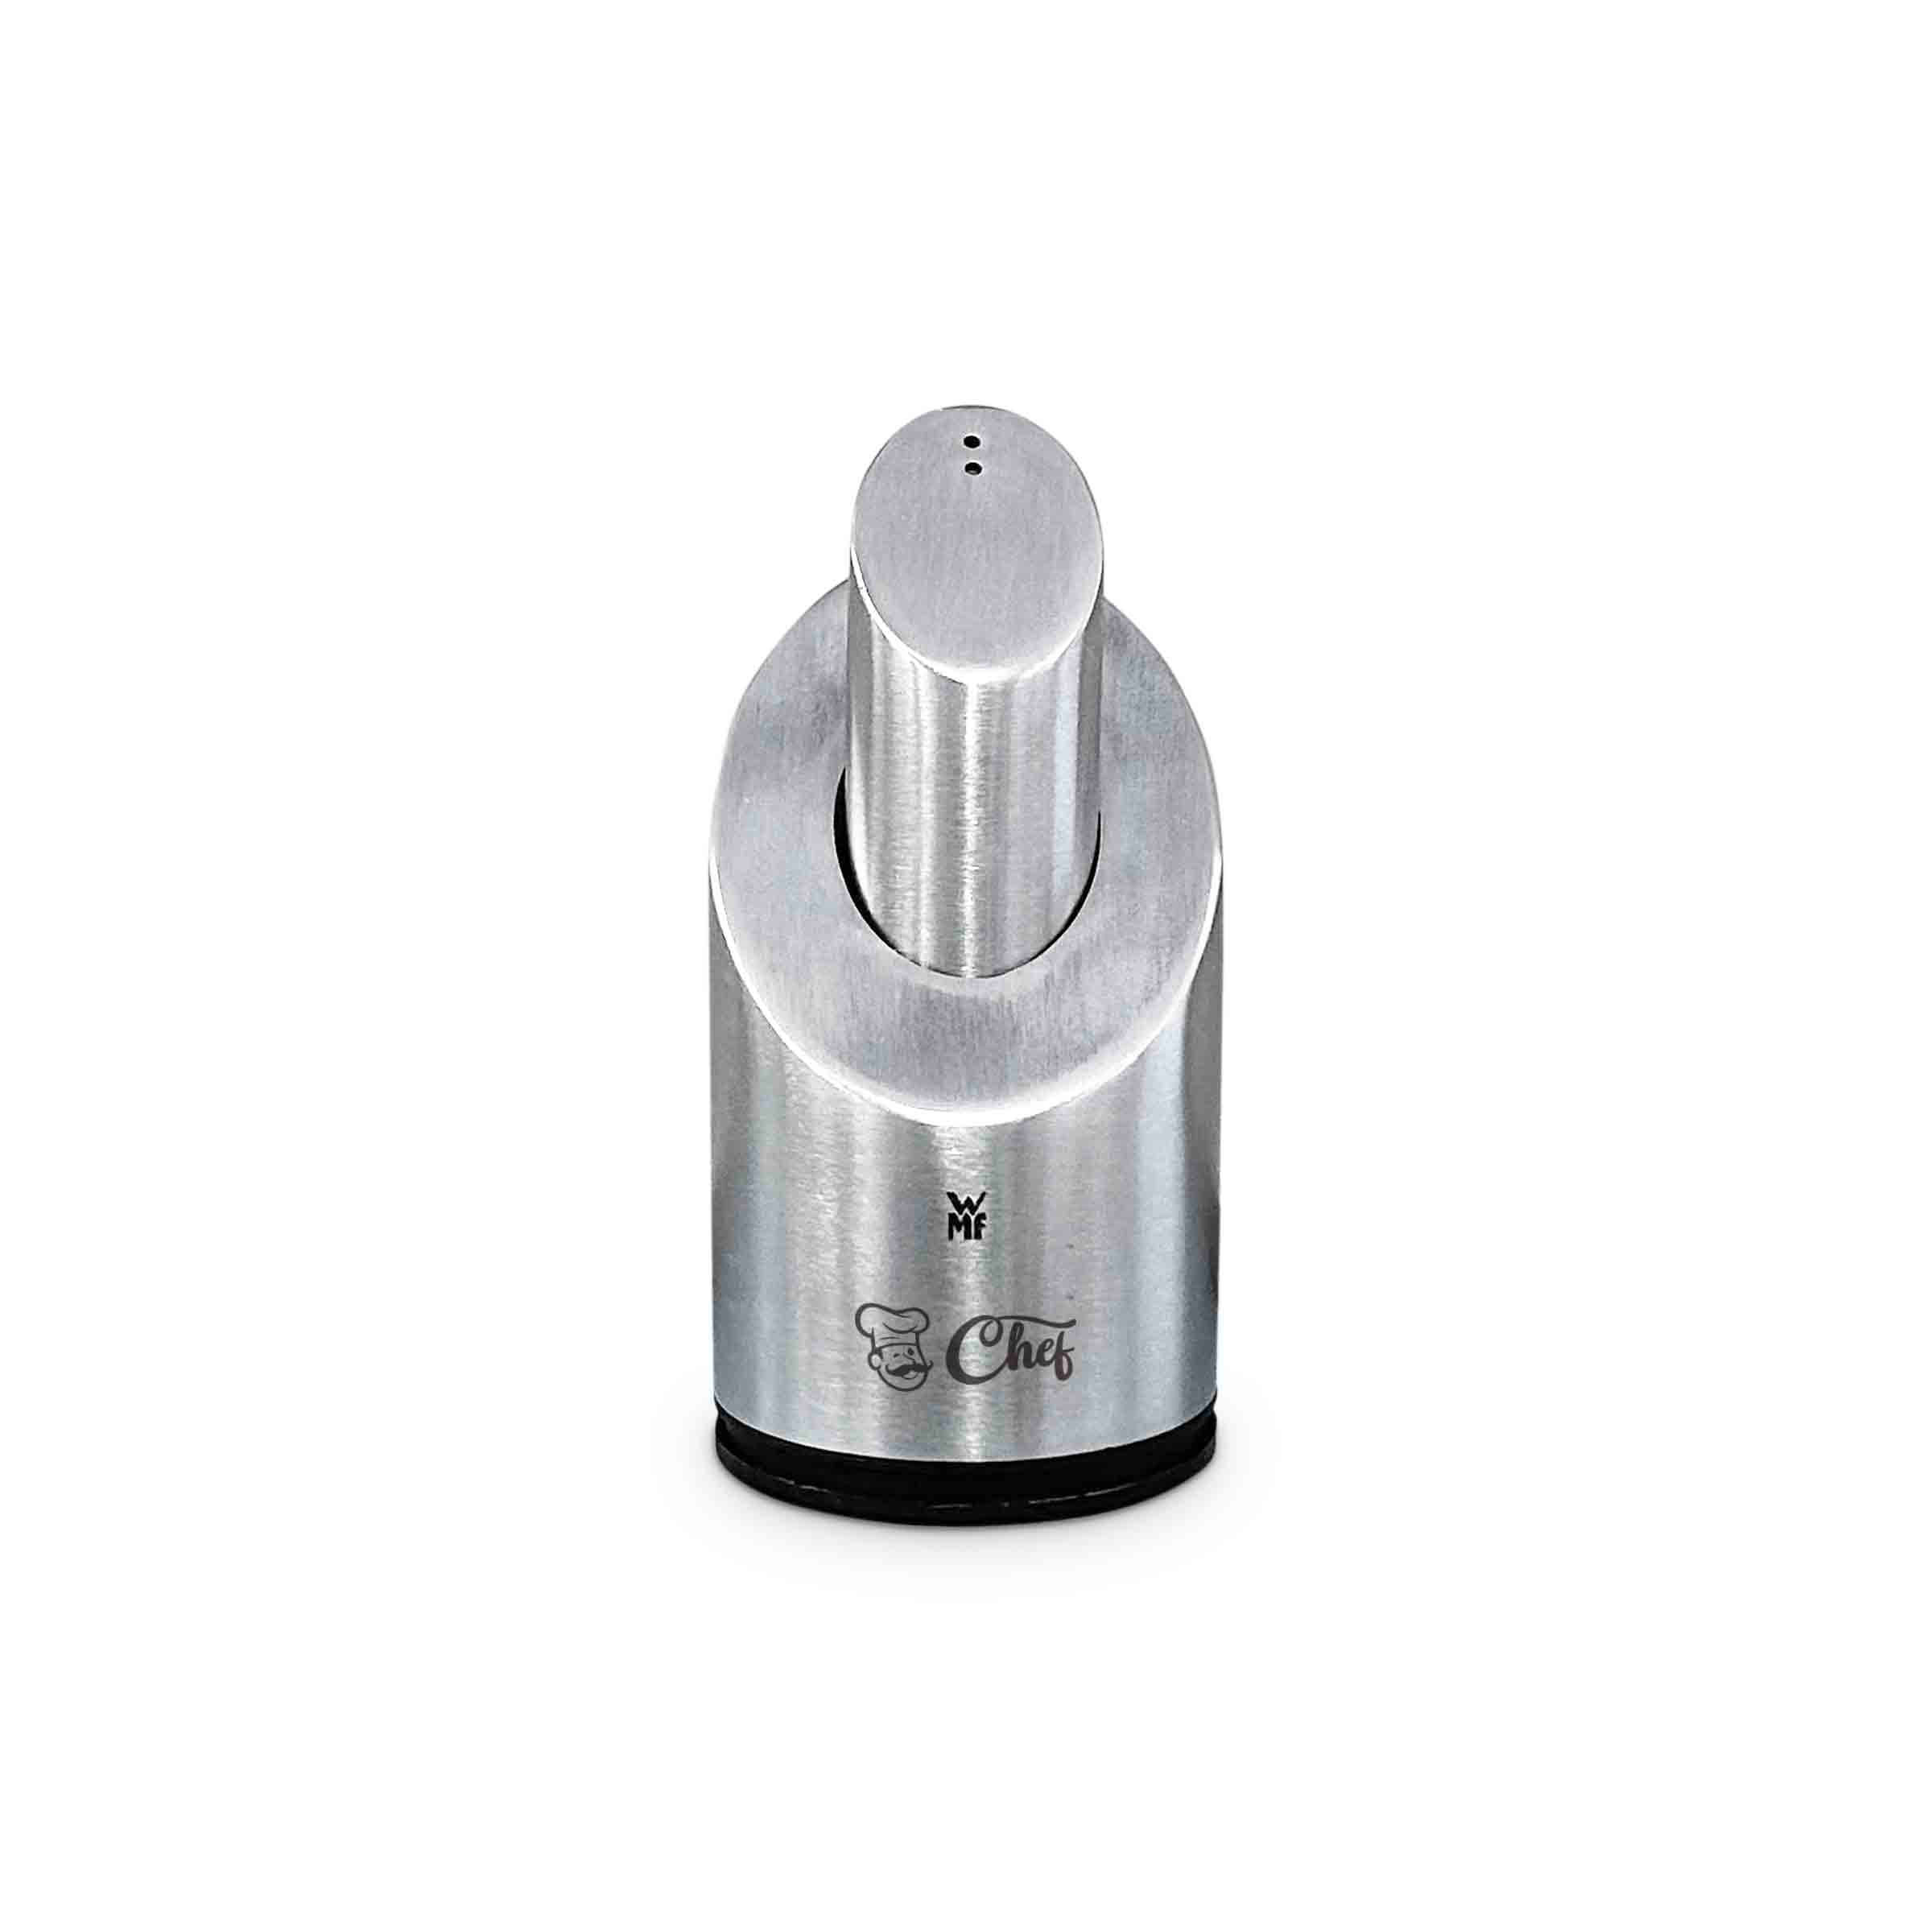 WMF Salt and Pepper Shaker Set Two in One Silver - Personalisation with an engraving and a sleeve